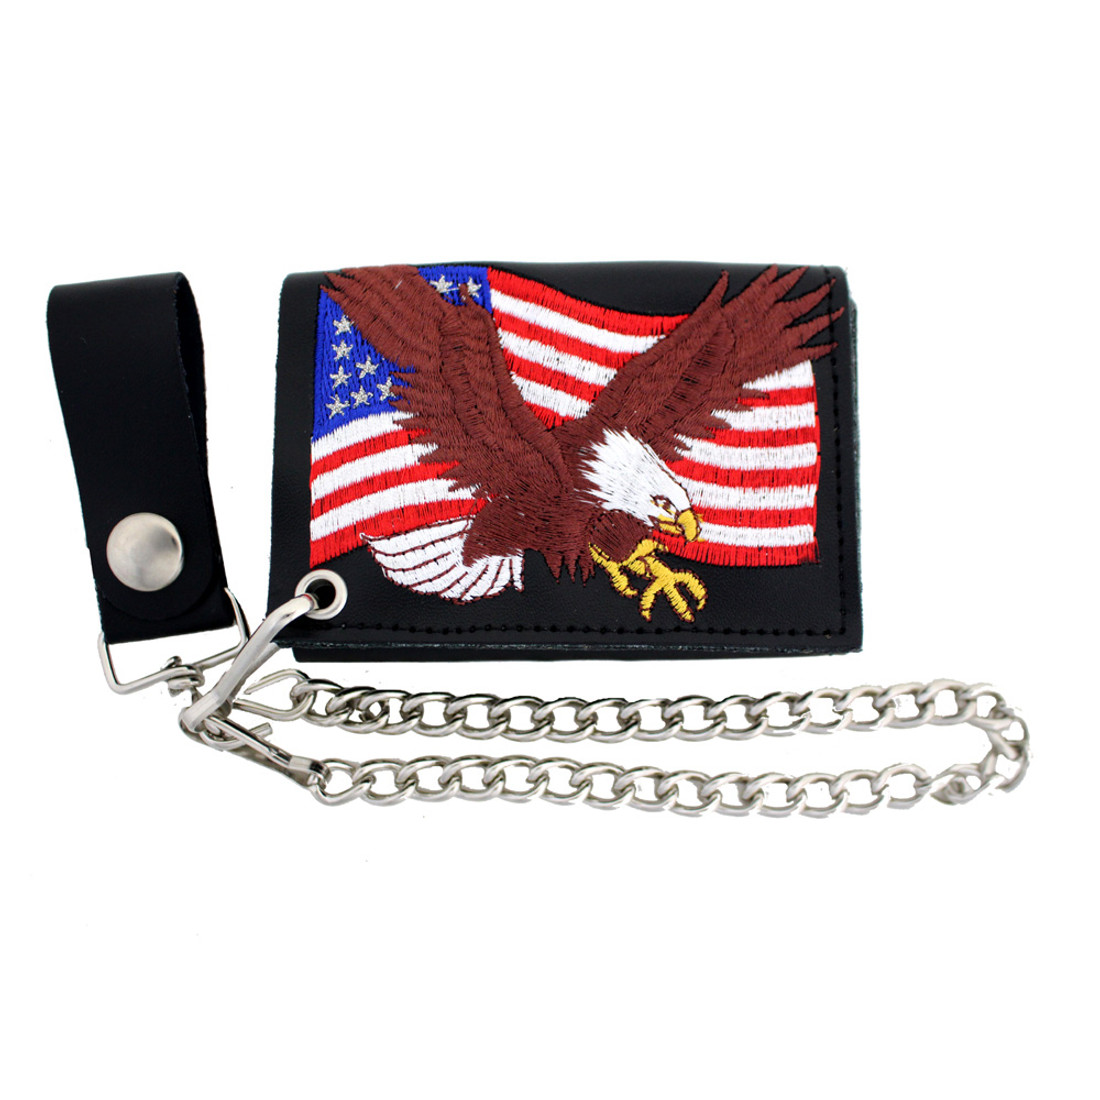 Eagle and American Flag embroidered on black leather trifold wallet.